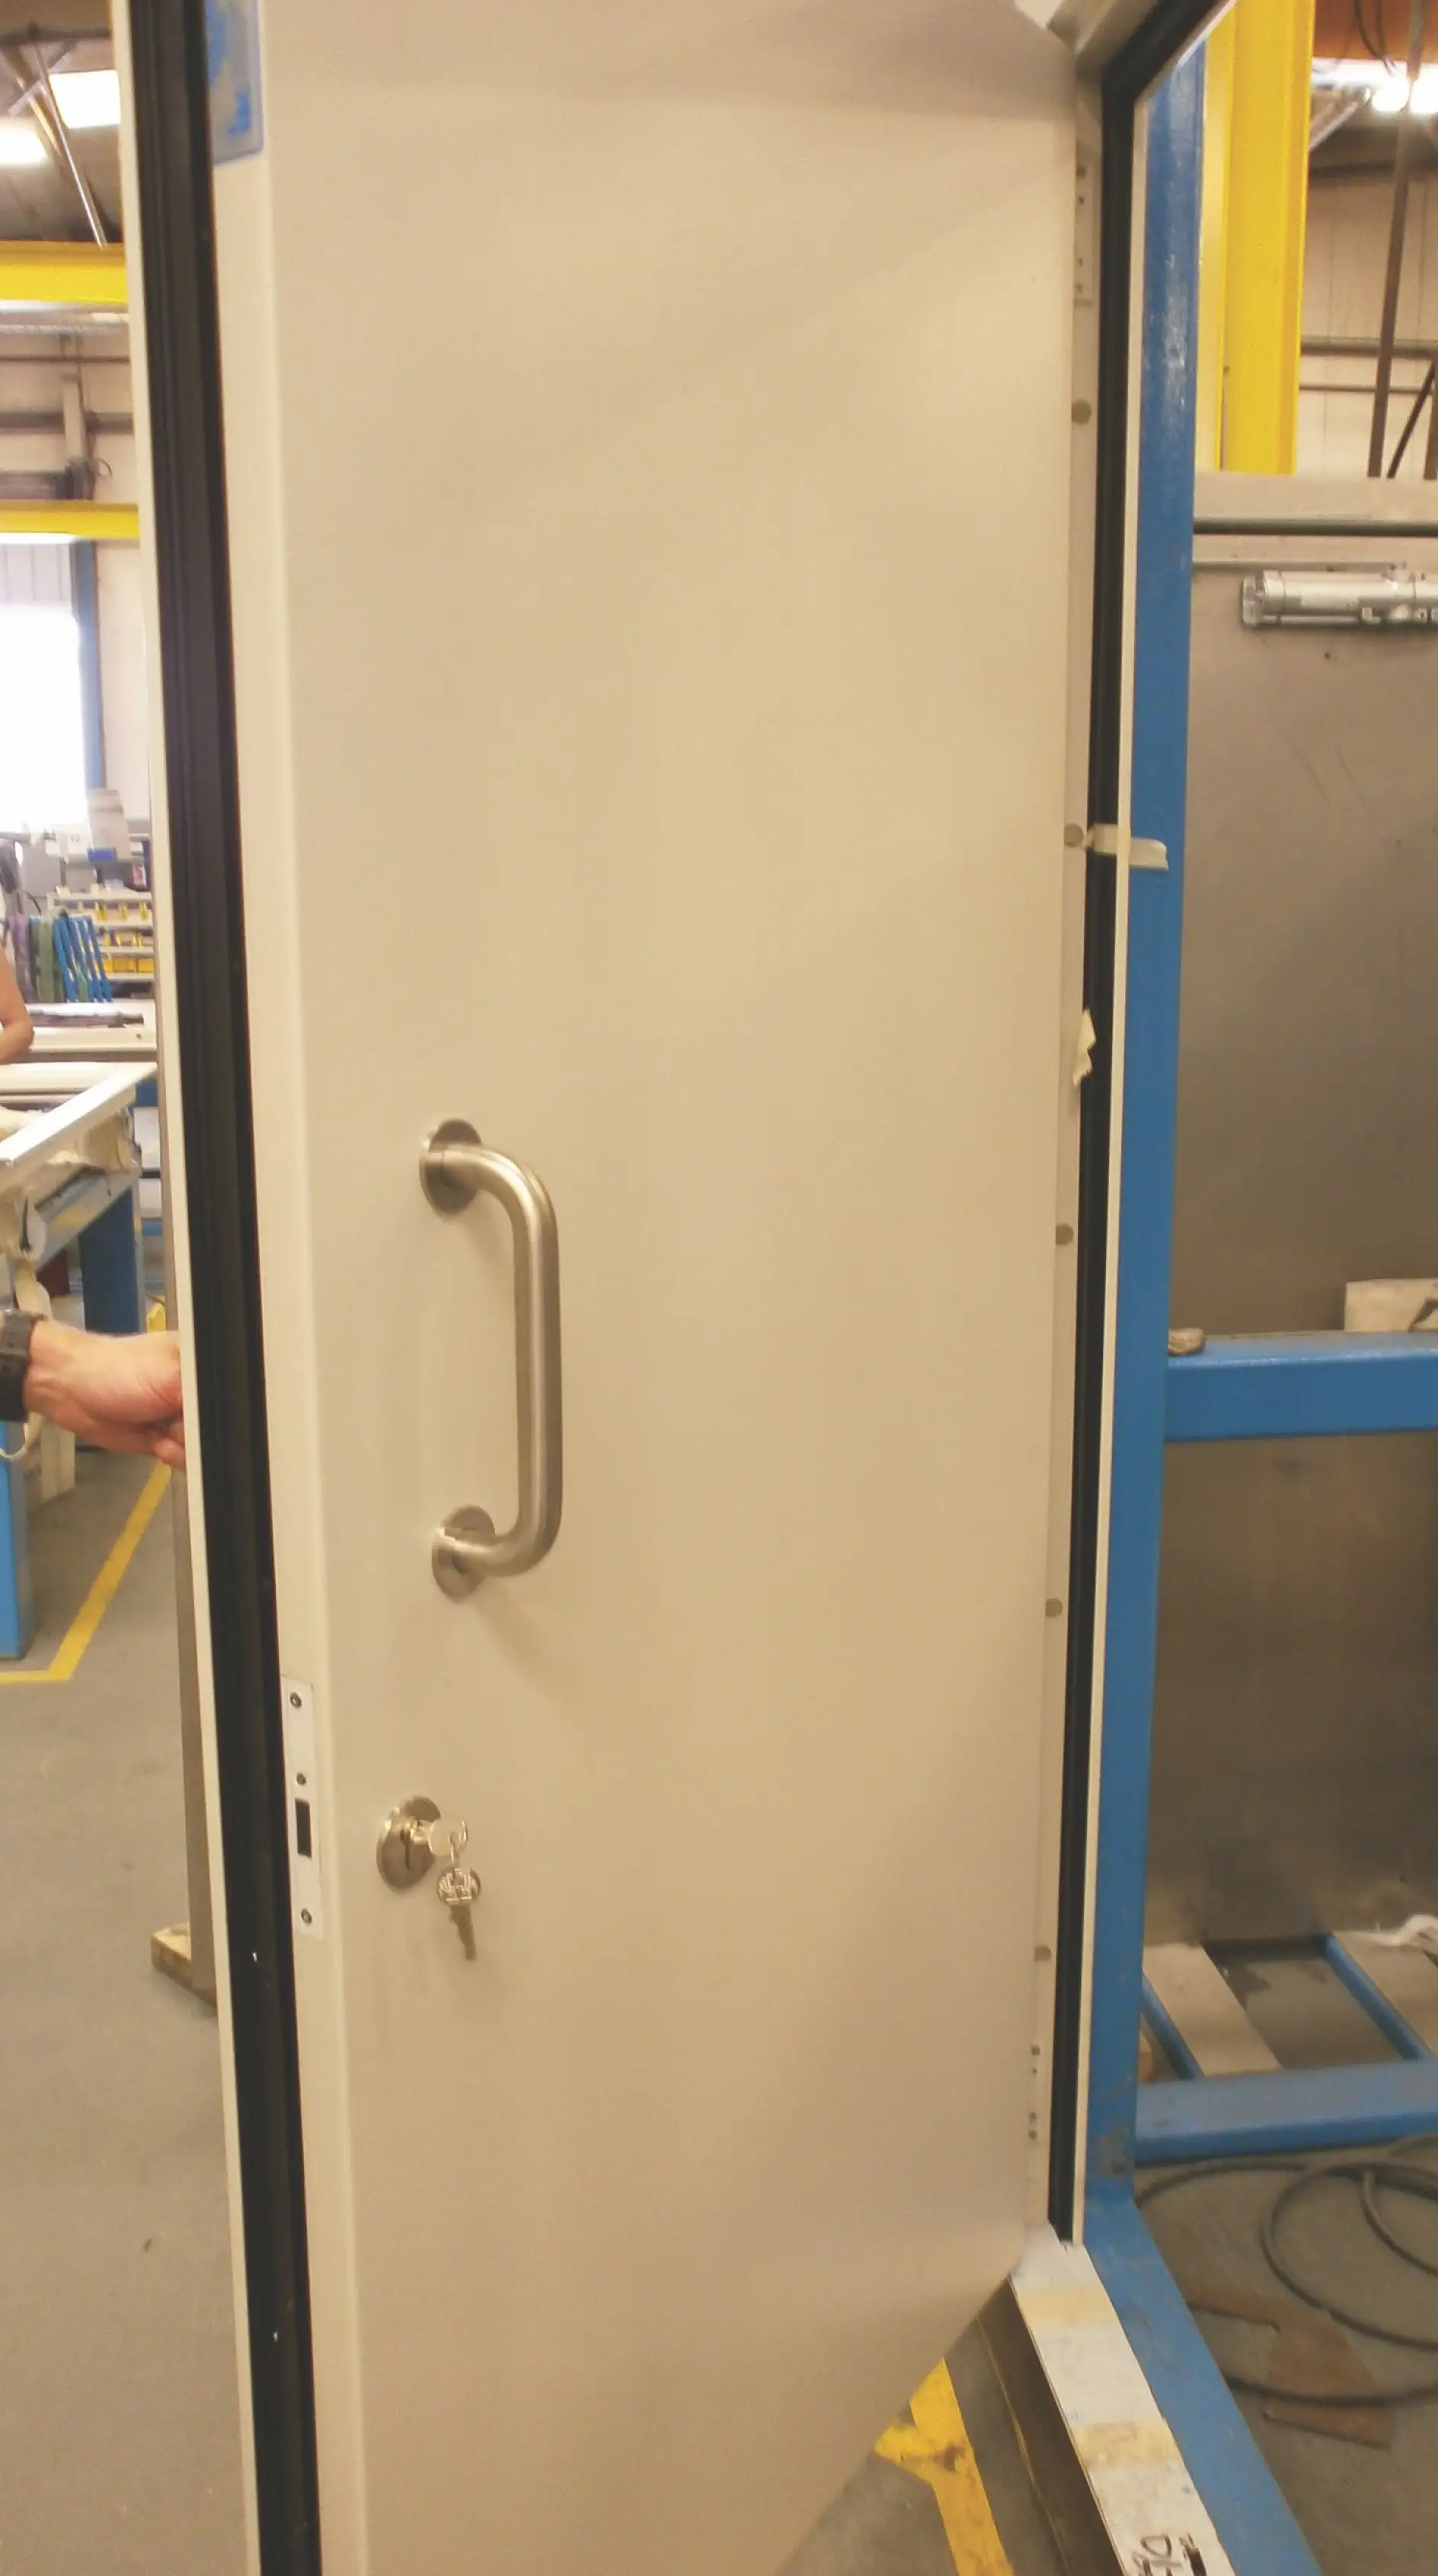 tesa ACX plus 7074 provided a bonding strength to match spot welding in sound proof doors